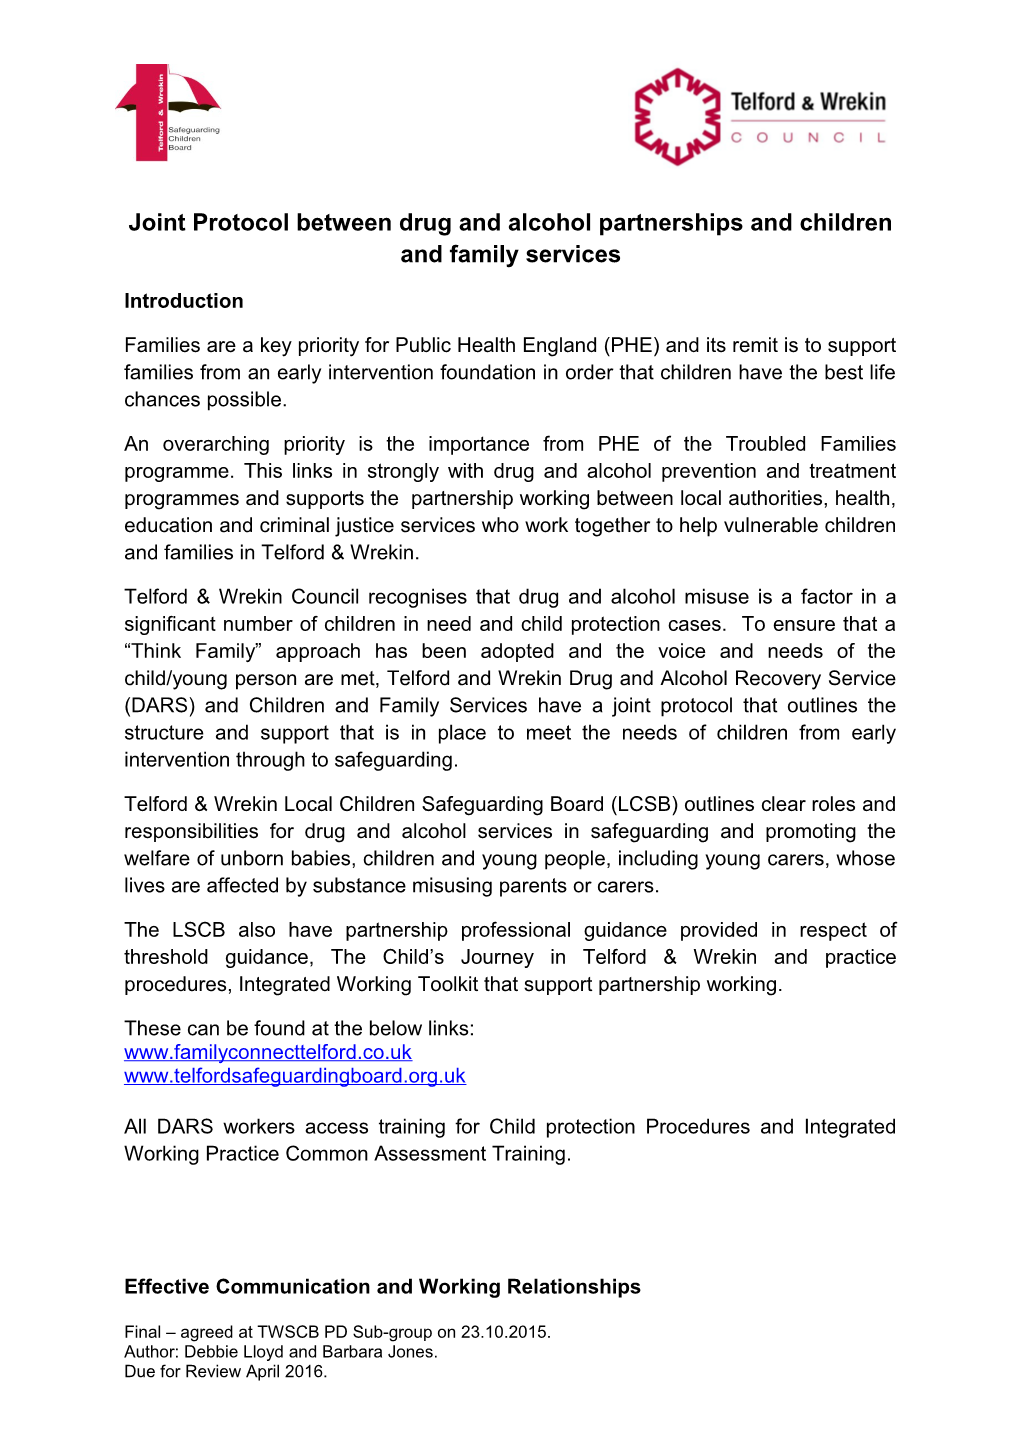 Joint Protocol Between Drug and Alcohol Partnerships and Children and Family Services